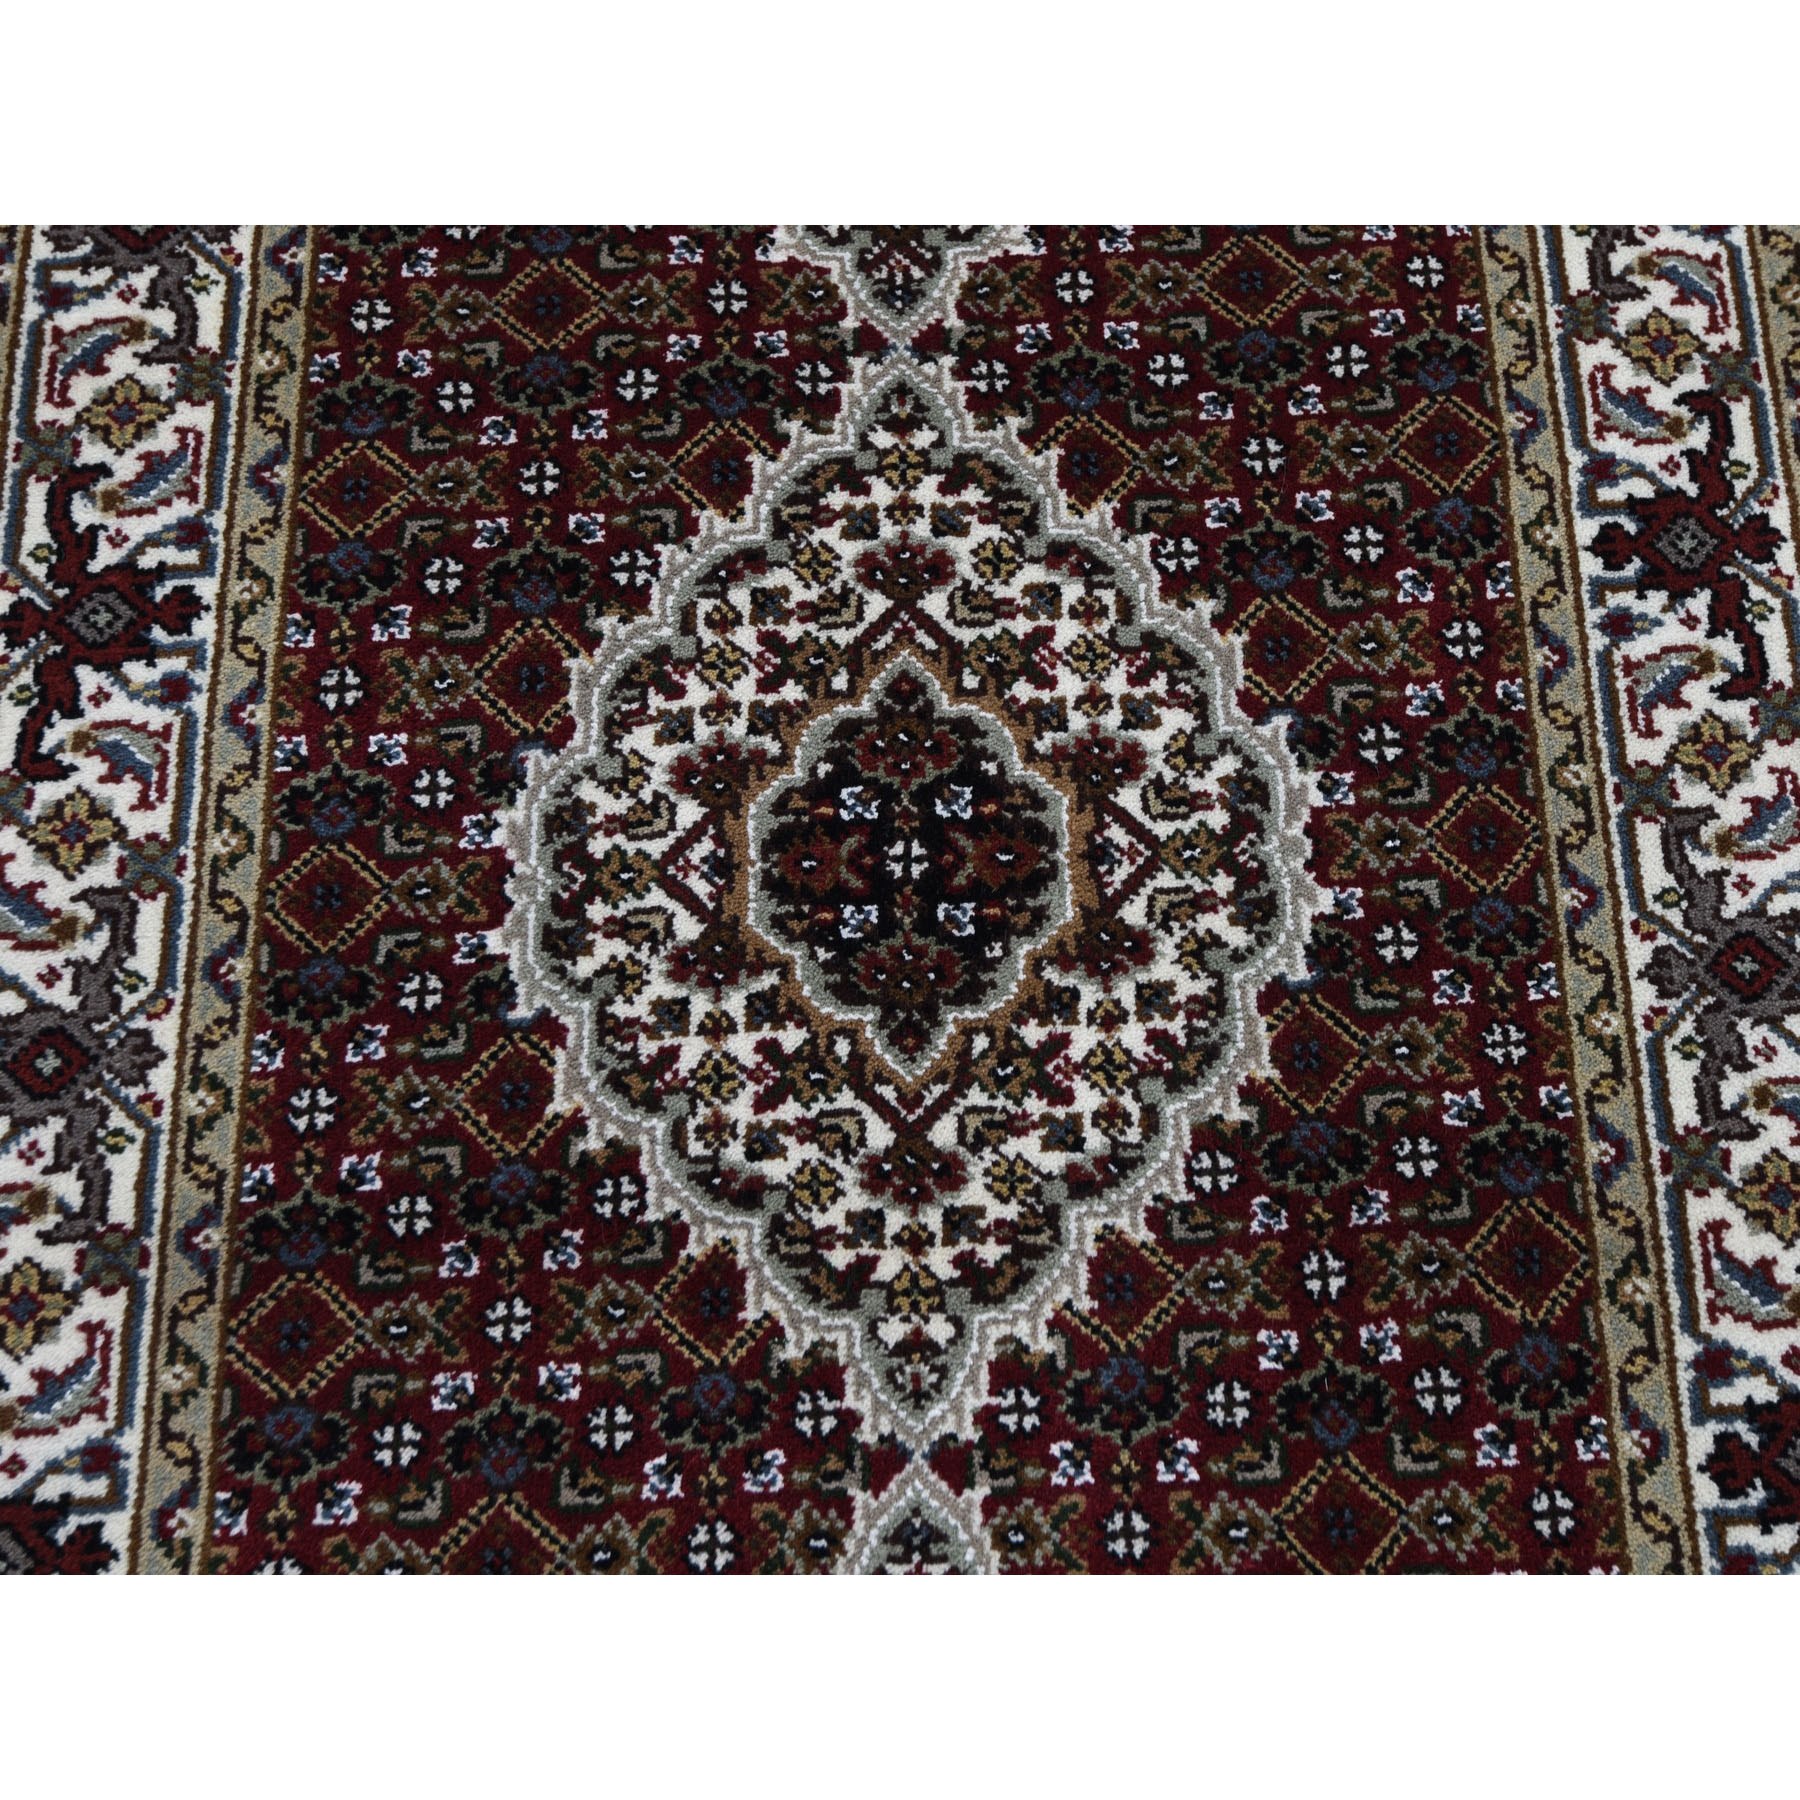 2-7 x20- Red Tabriz Mahi Wool and Silk XL Runner Hand Knotted Oriental Rug 